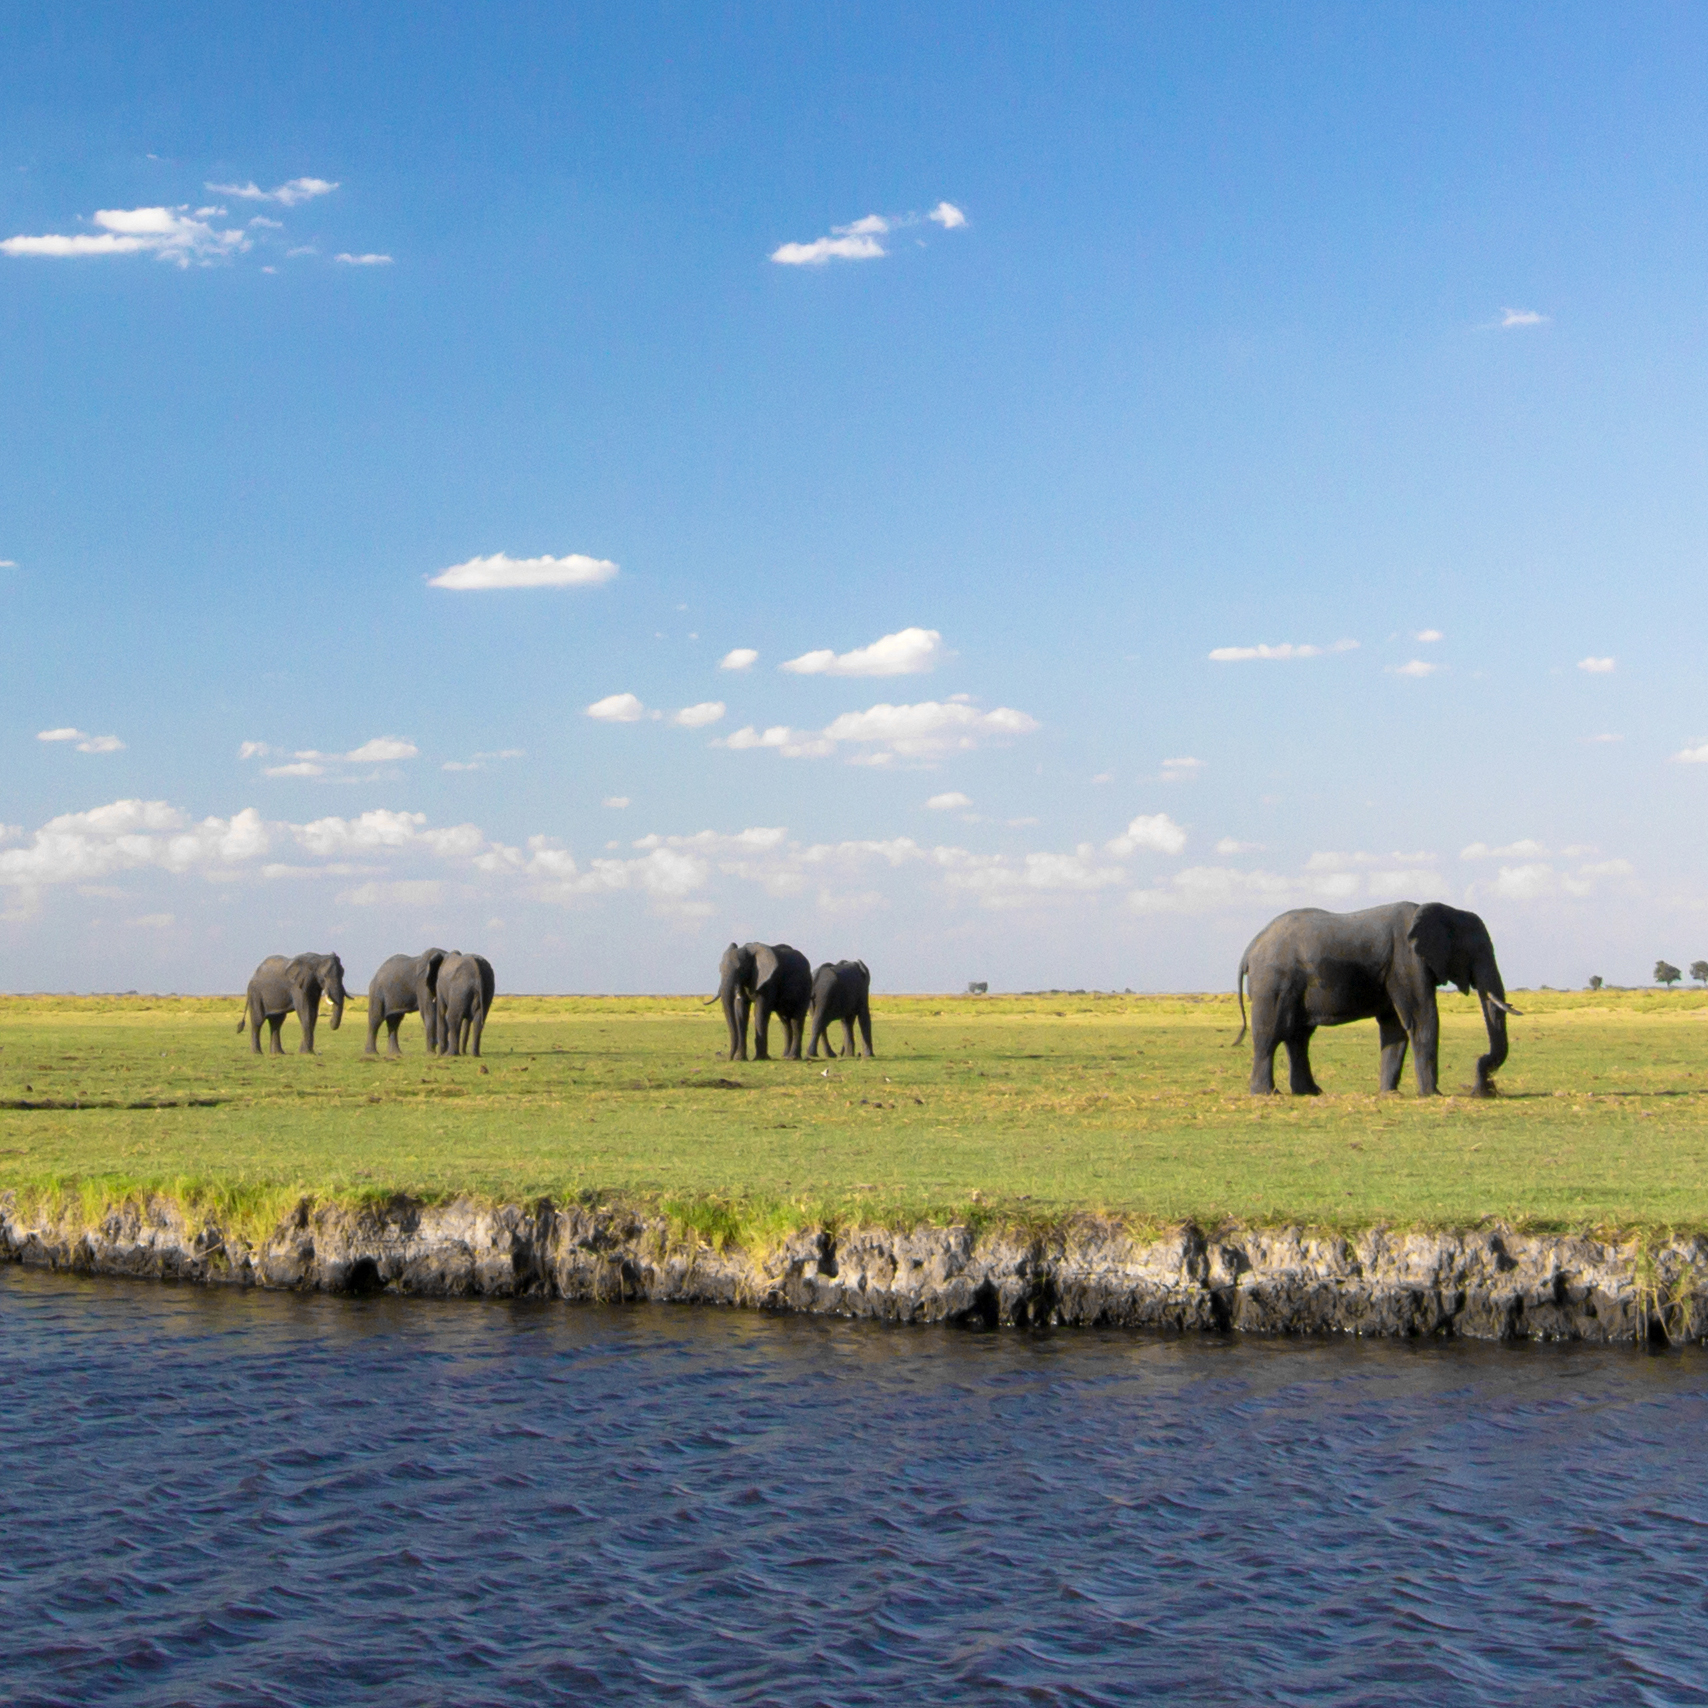 Panorama of elephants grazing on a wide green plain on the banks of the Chobe River in Botswana